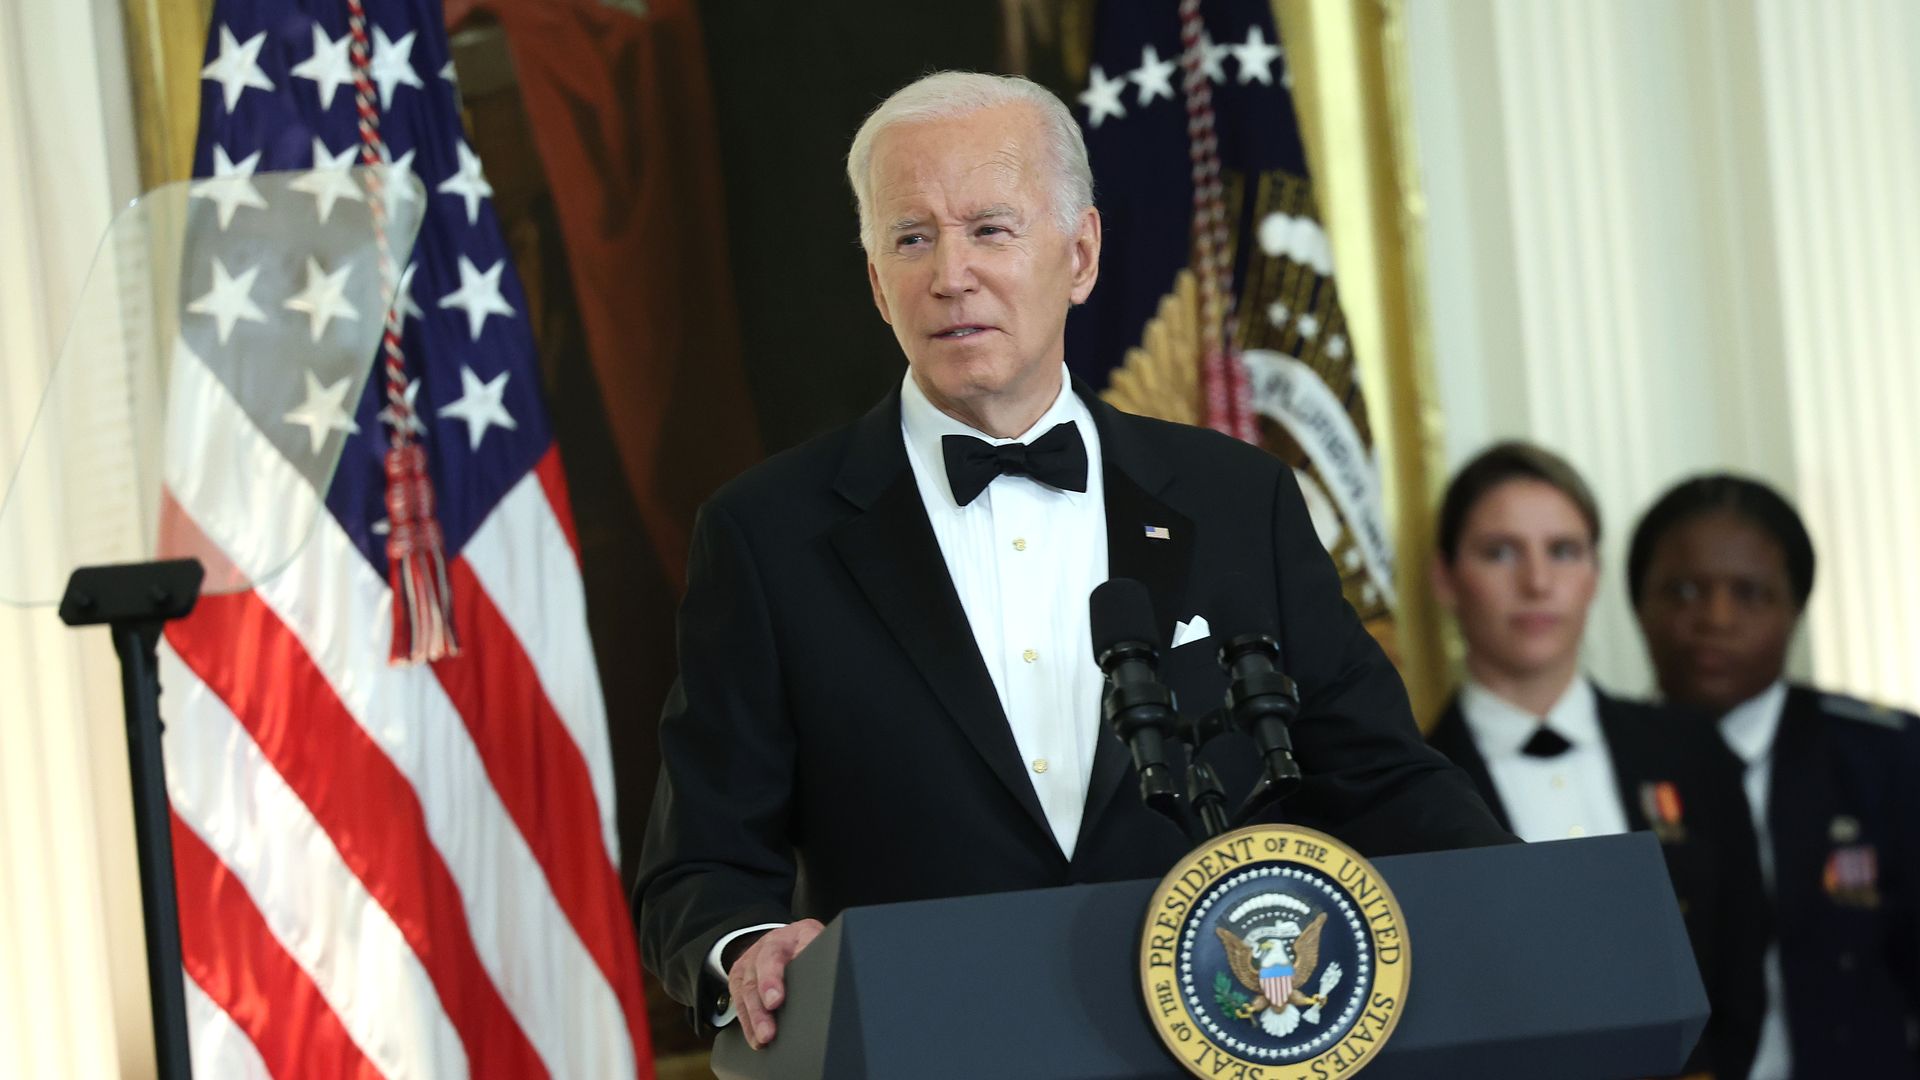 U.S. President Joe Biden delivers remarks at a reception for the 2022 Kennedy Center honorees at the White House on December 04, 2022 in Washington, DC